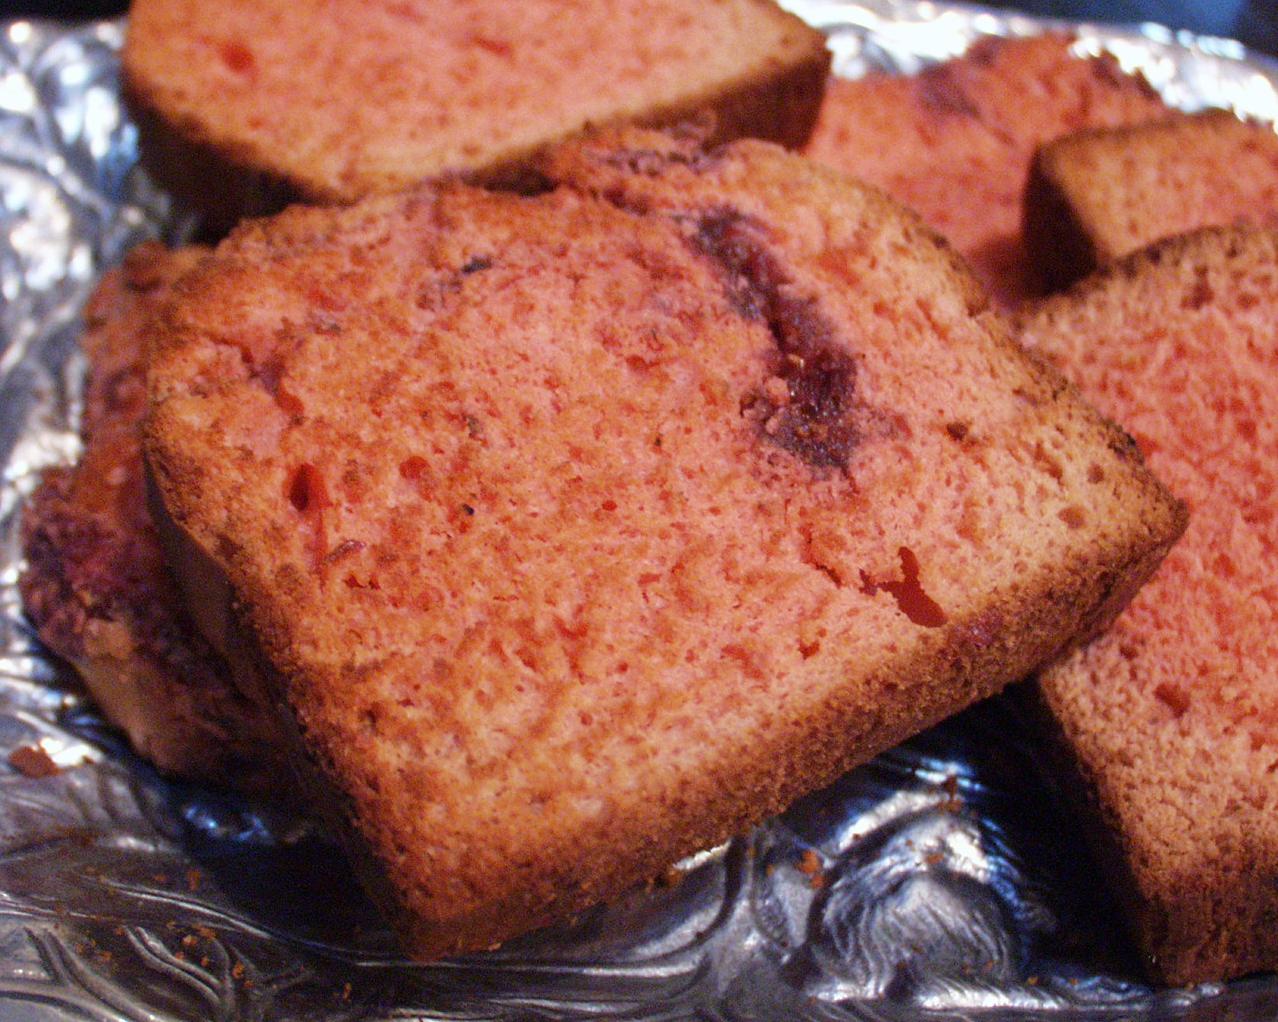  A classic toast is good, but a Raspberry Wine Toaster Bread is even better!